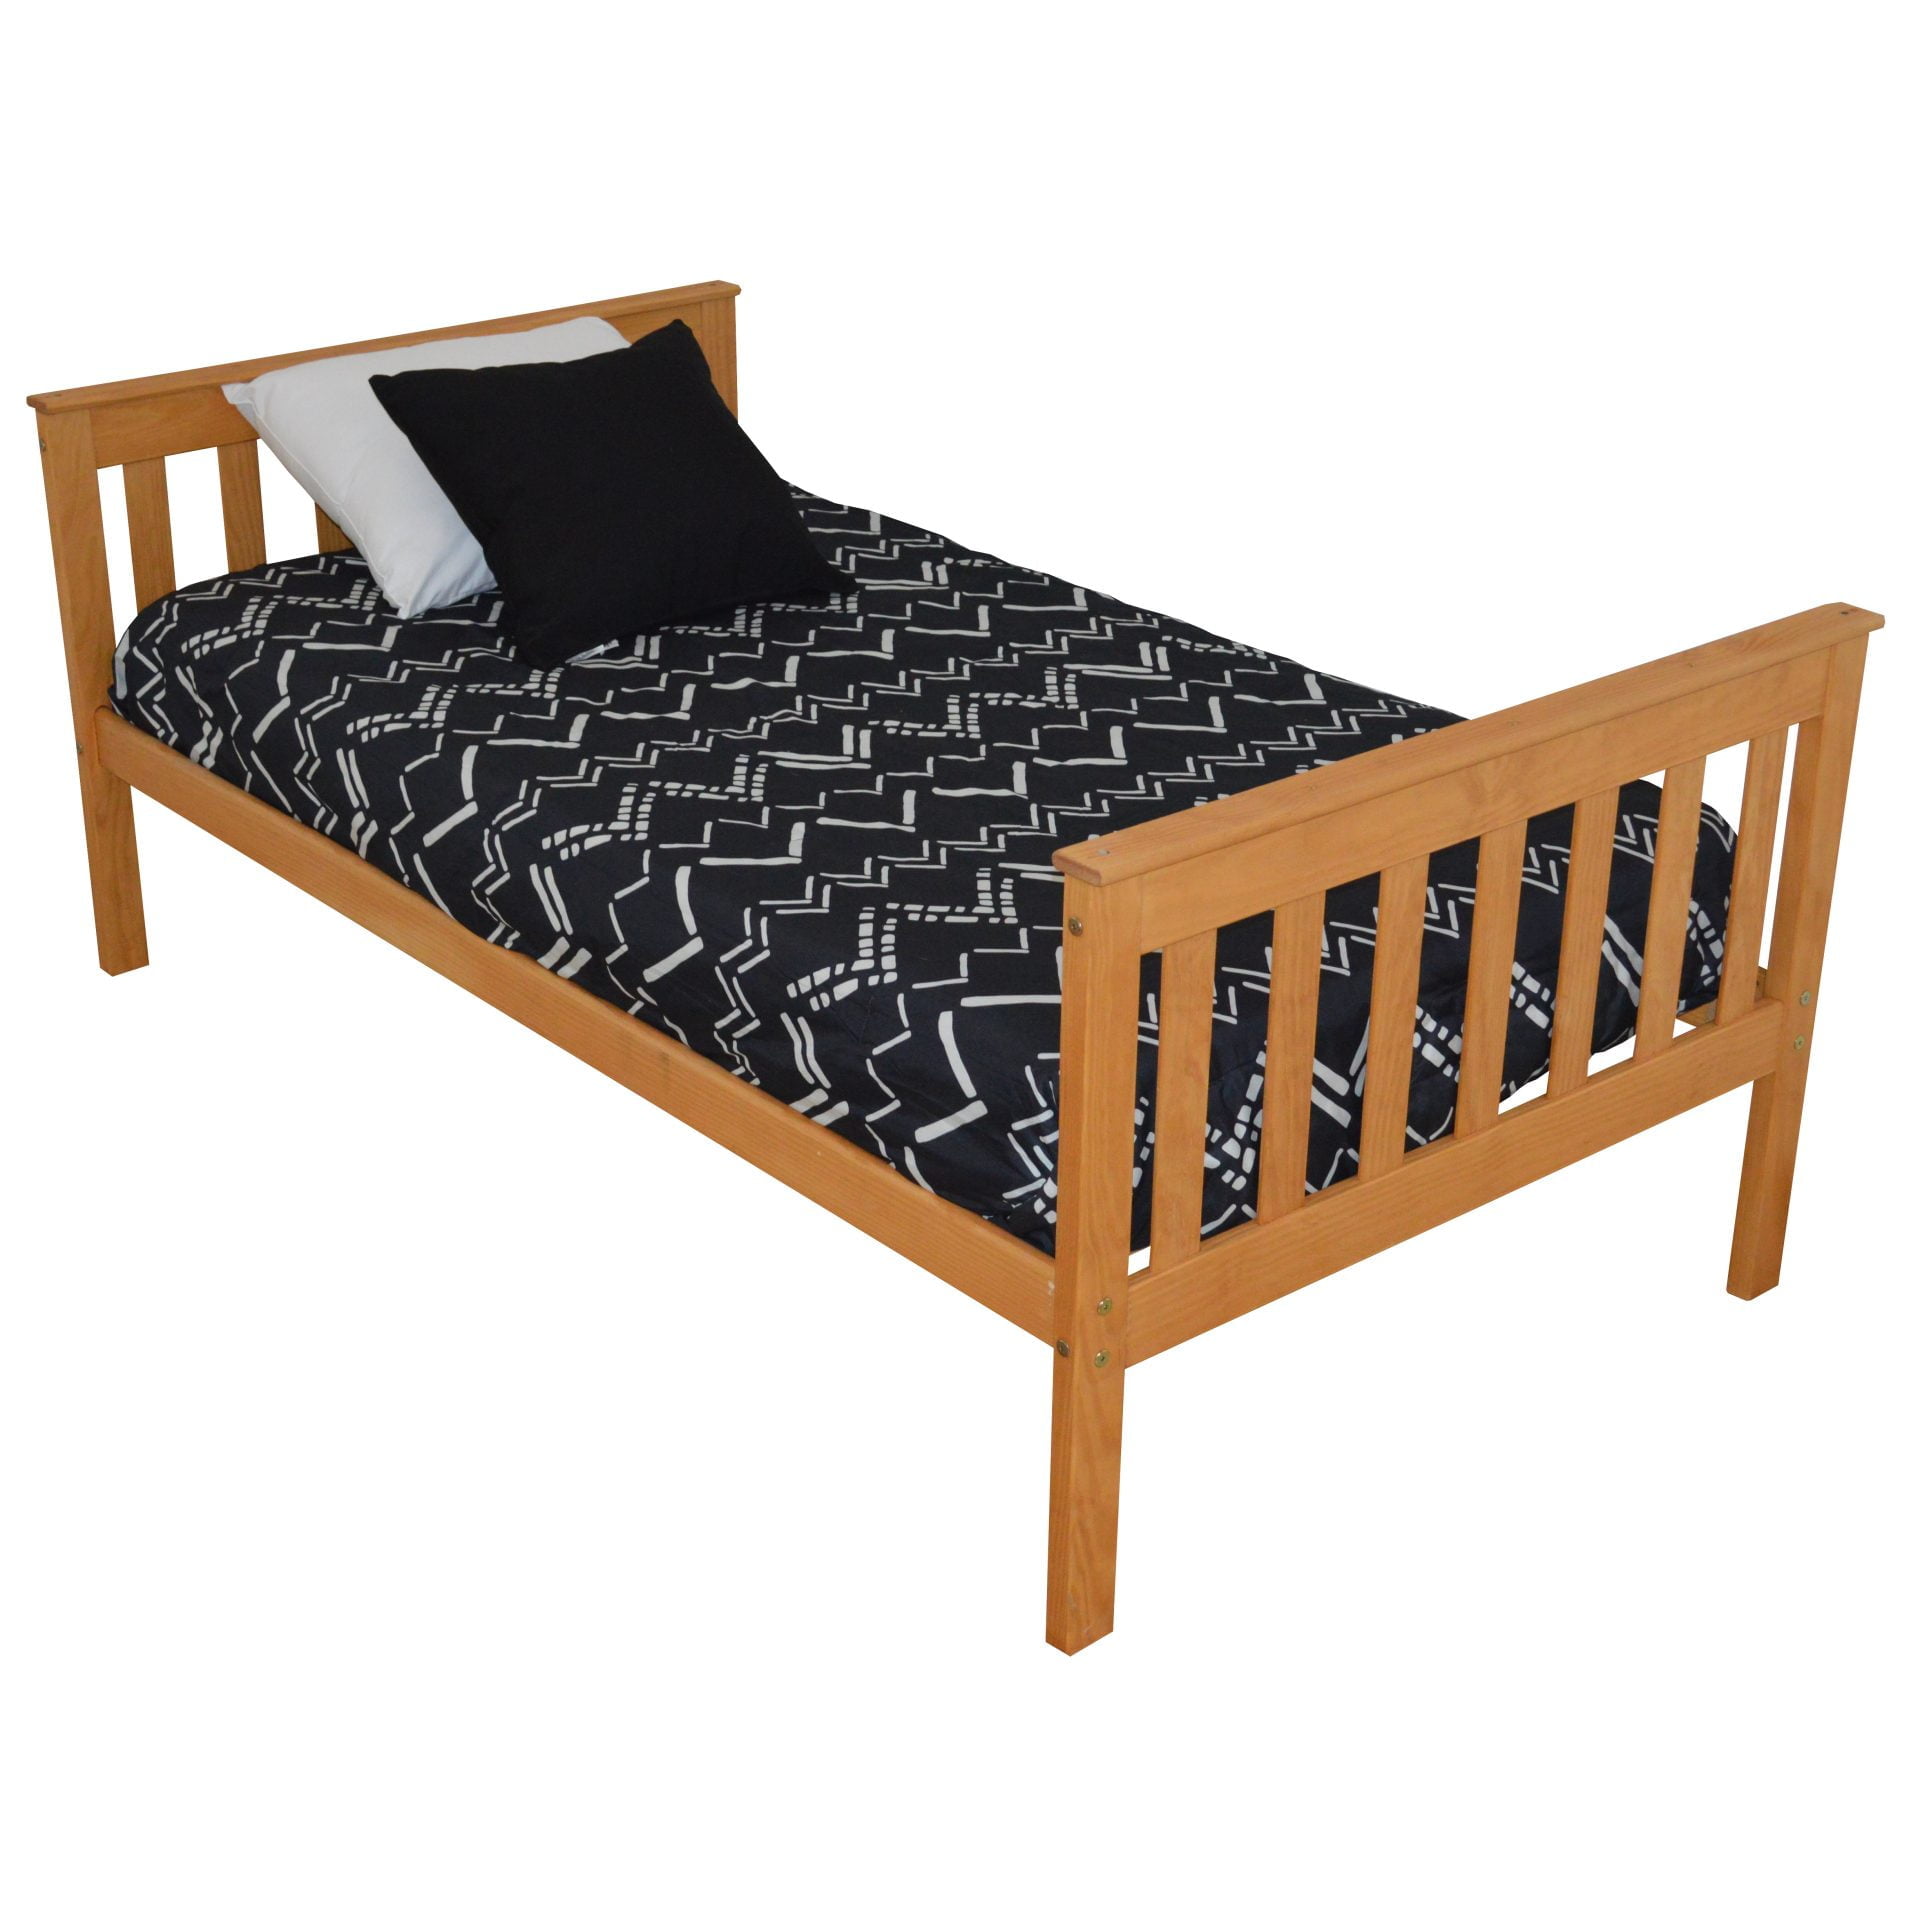 Versaloft Mission Bed – Twin or Full